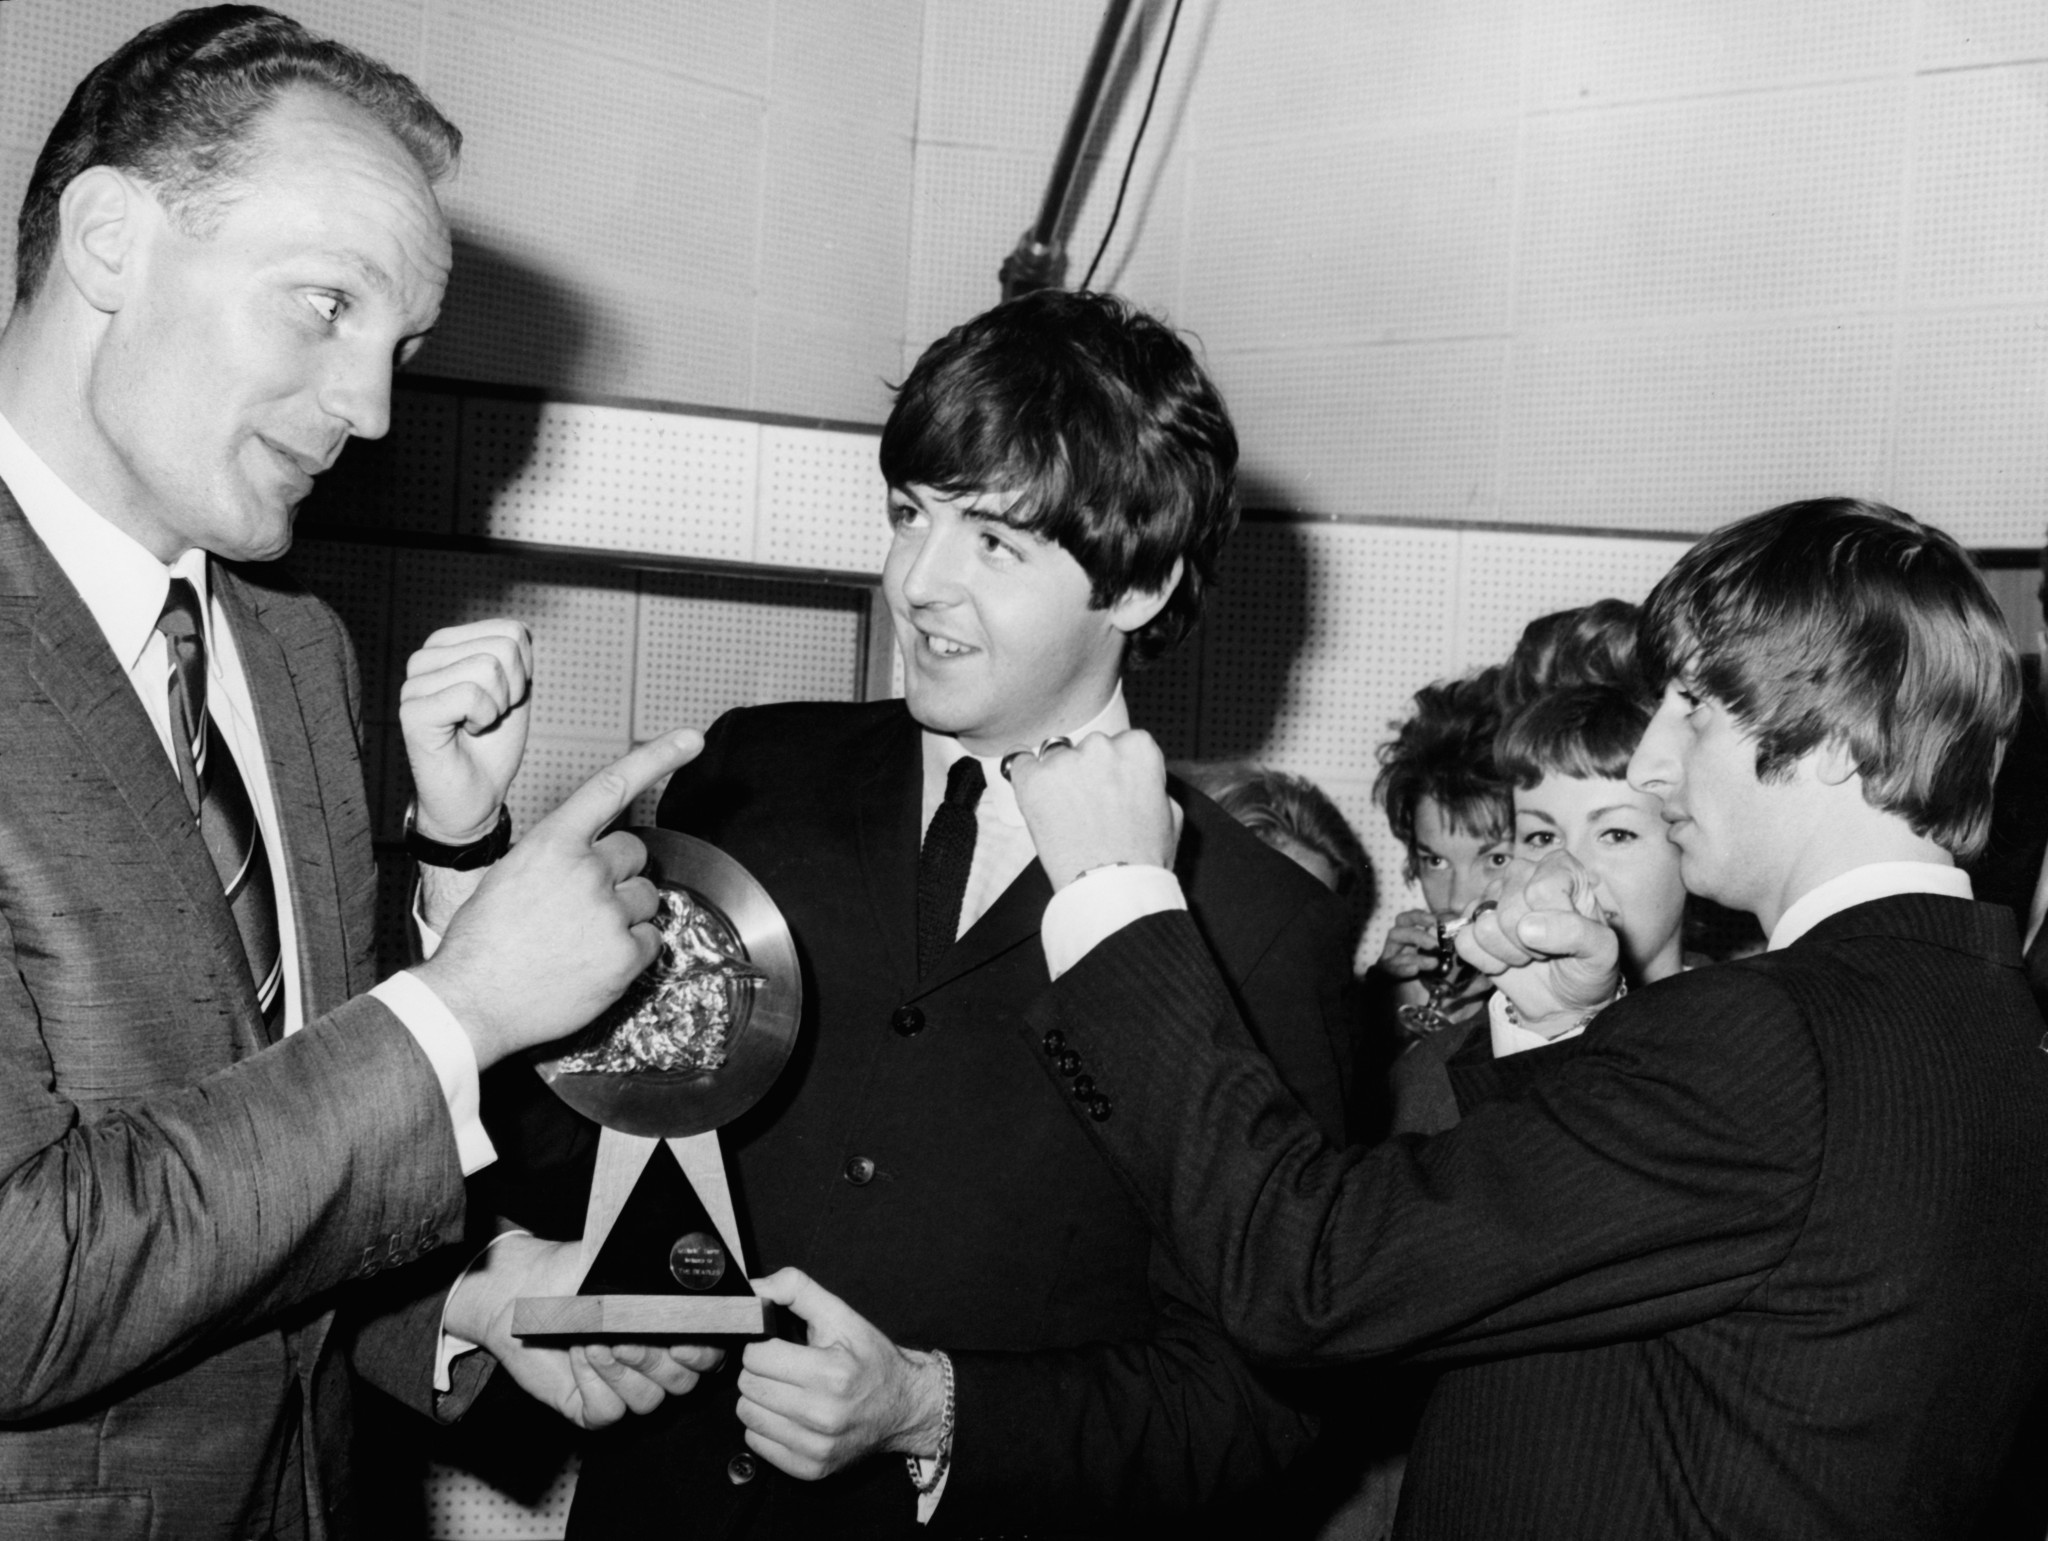 Our 'Enery, pictured above with Paul McCartney and Ringo Starr, was a hugely popular figure ©Getty Images